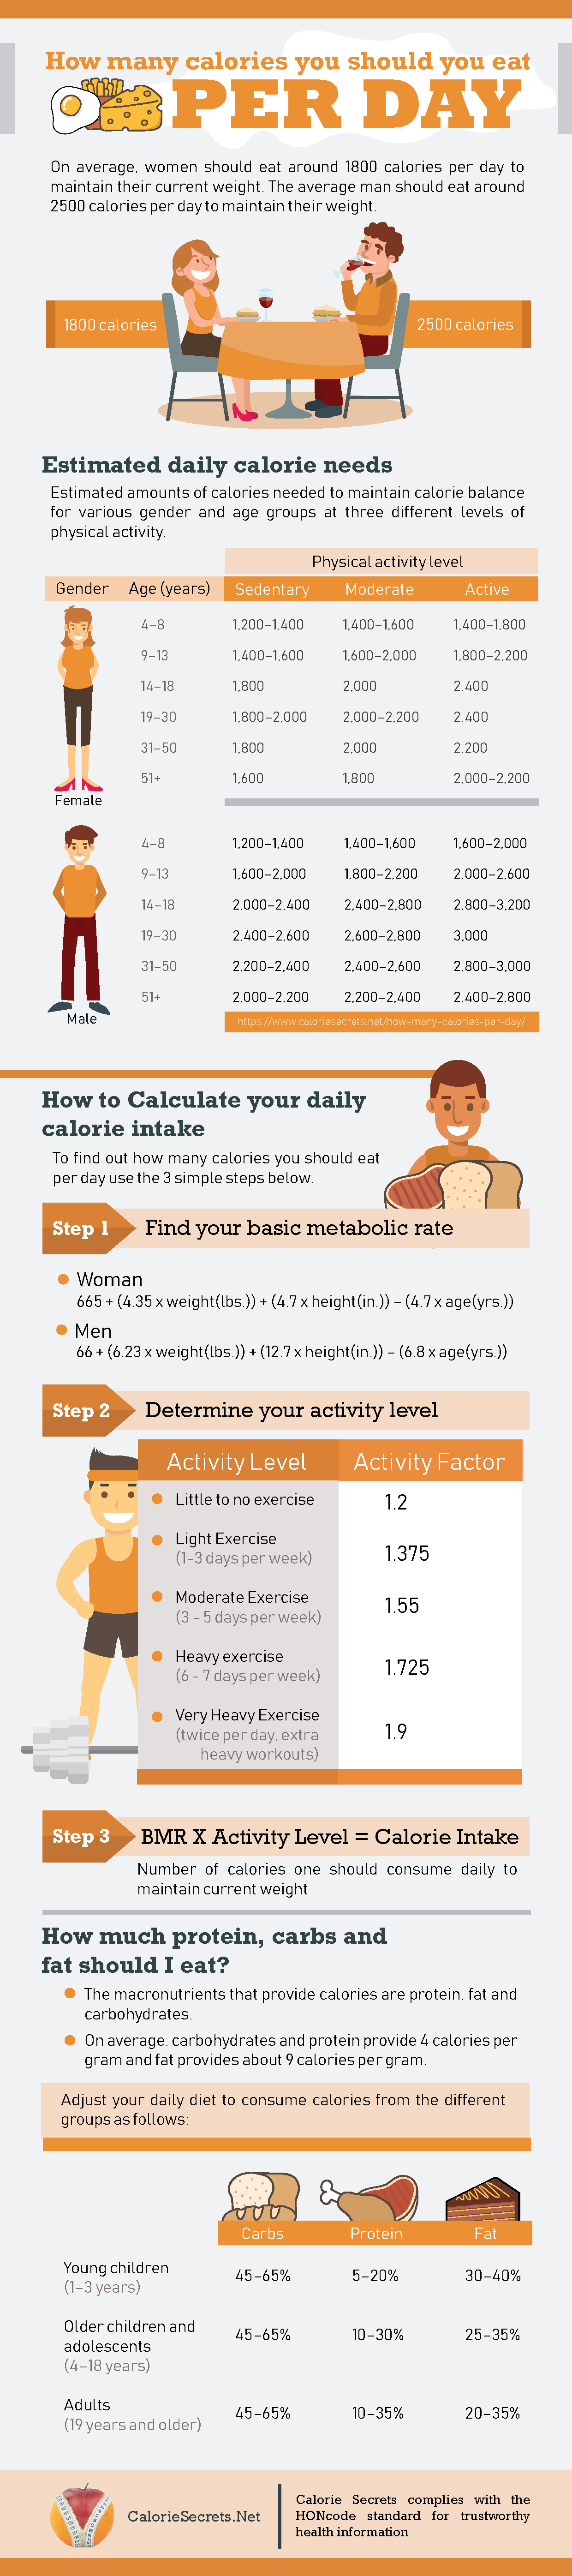 how many calories you should eat per day